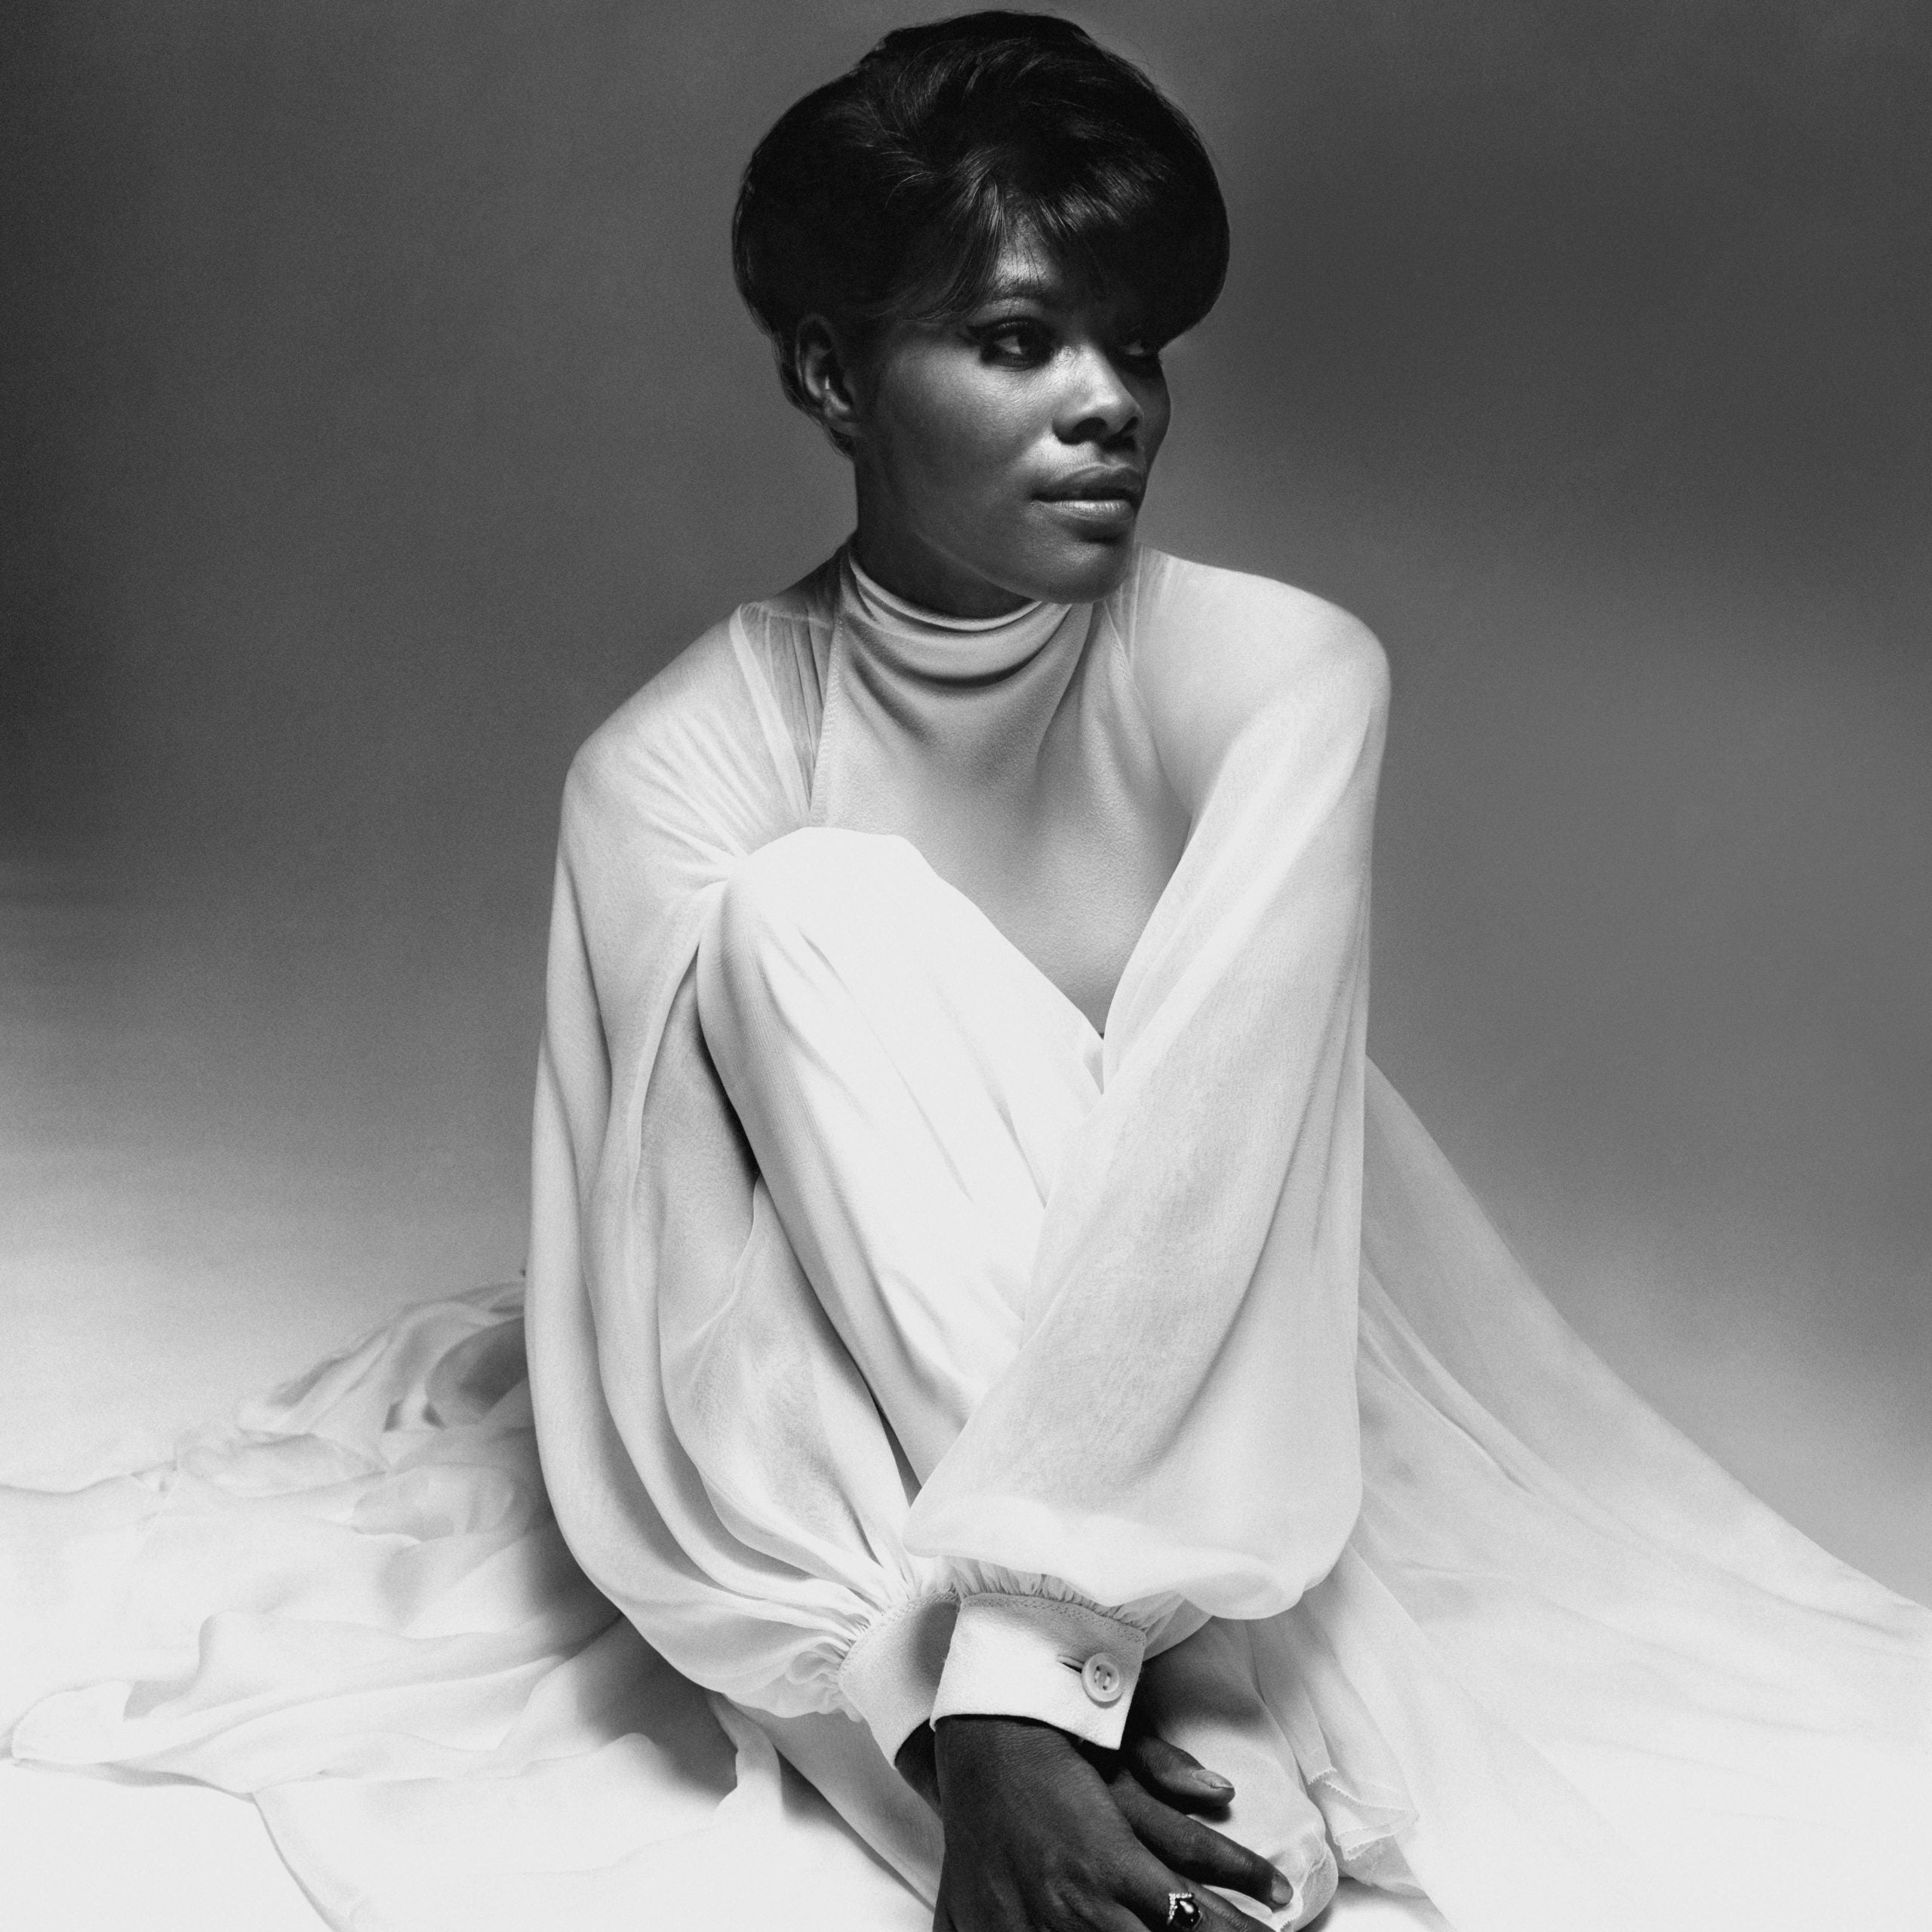 Dionne Warwick Wants Teyana Taylor To Play Her In A Biopic And We Couldn't Agree More